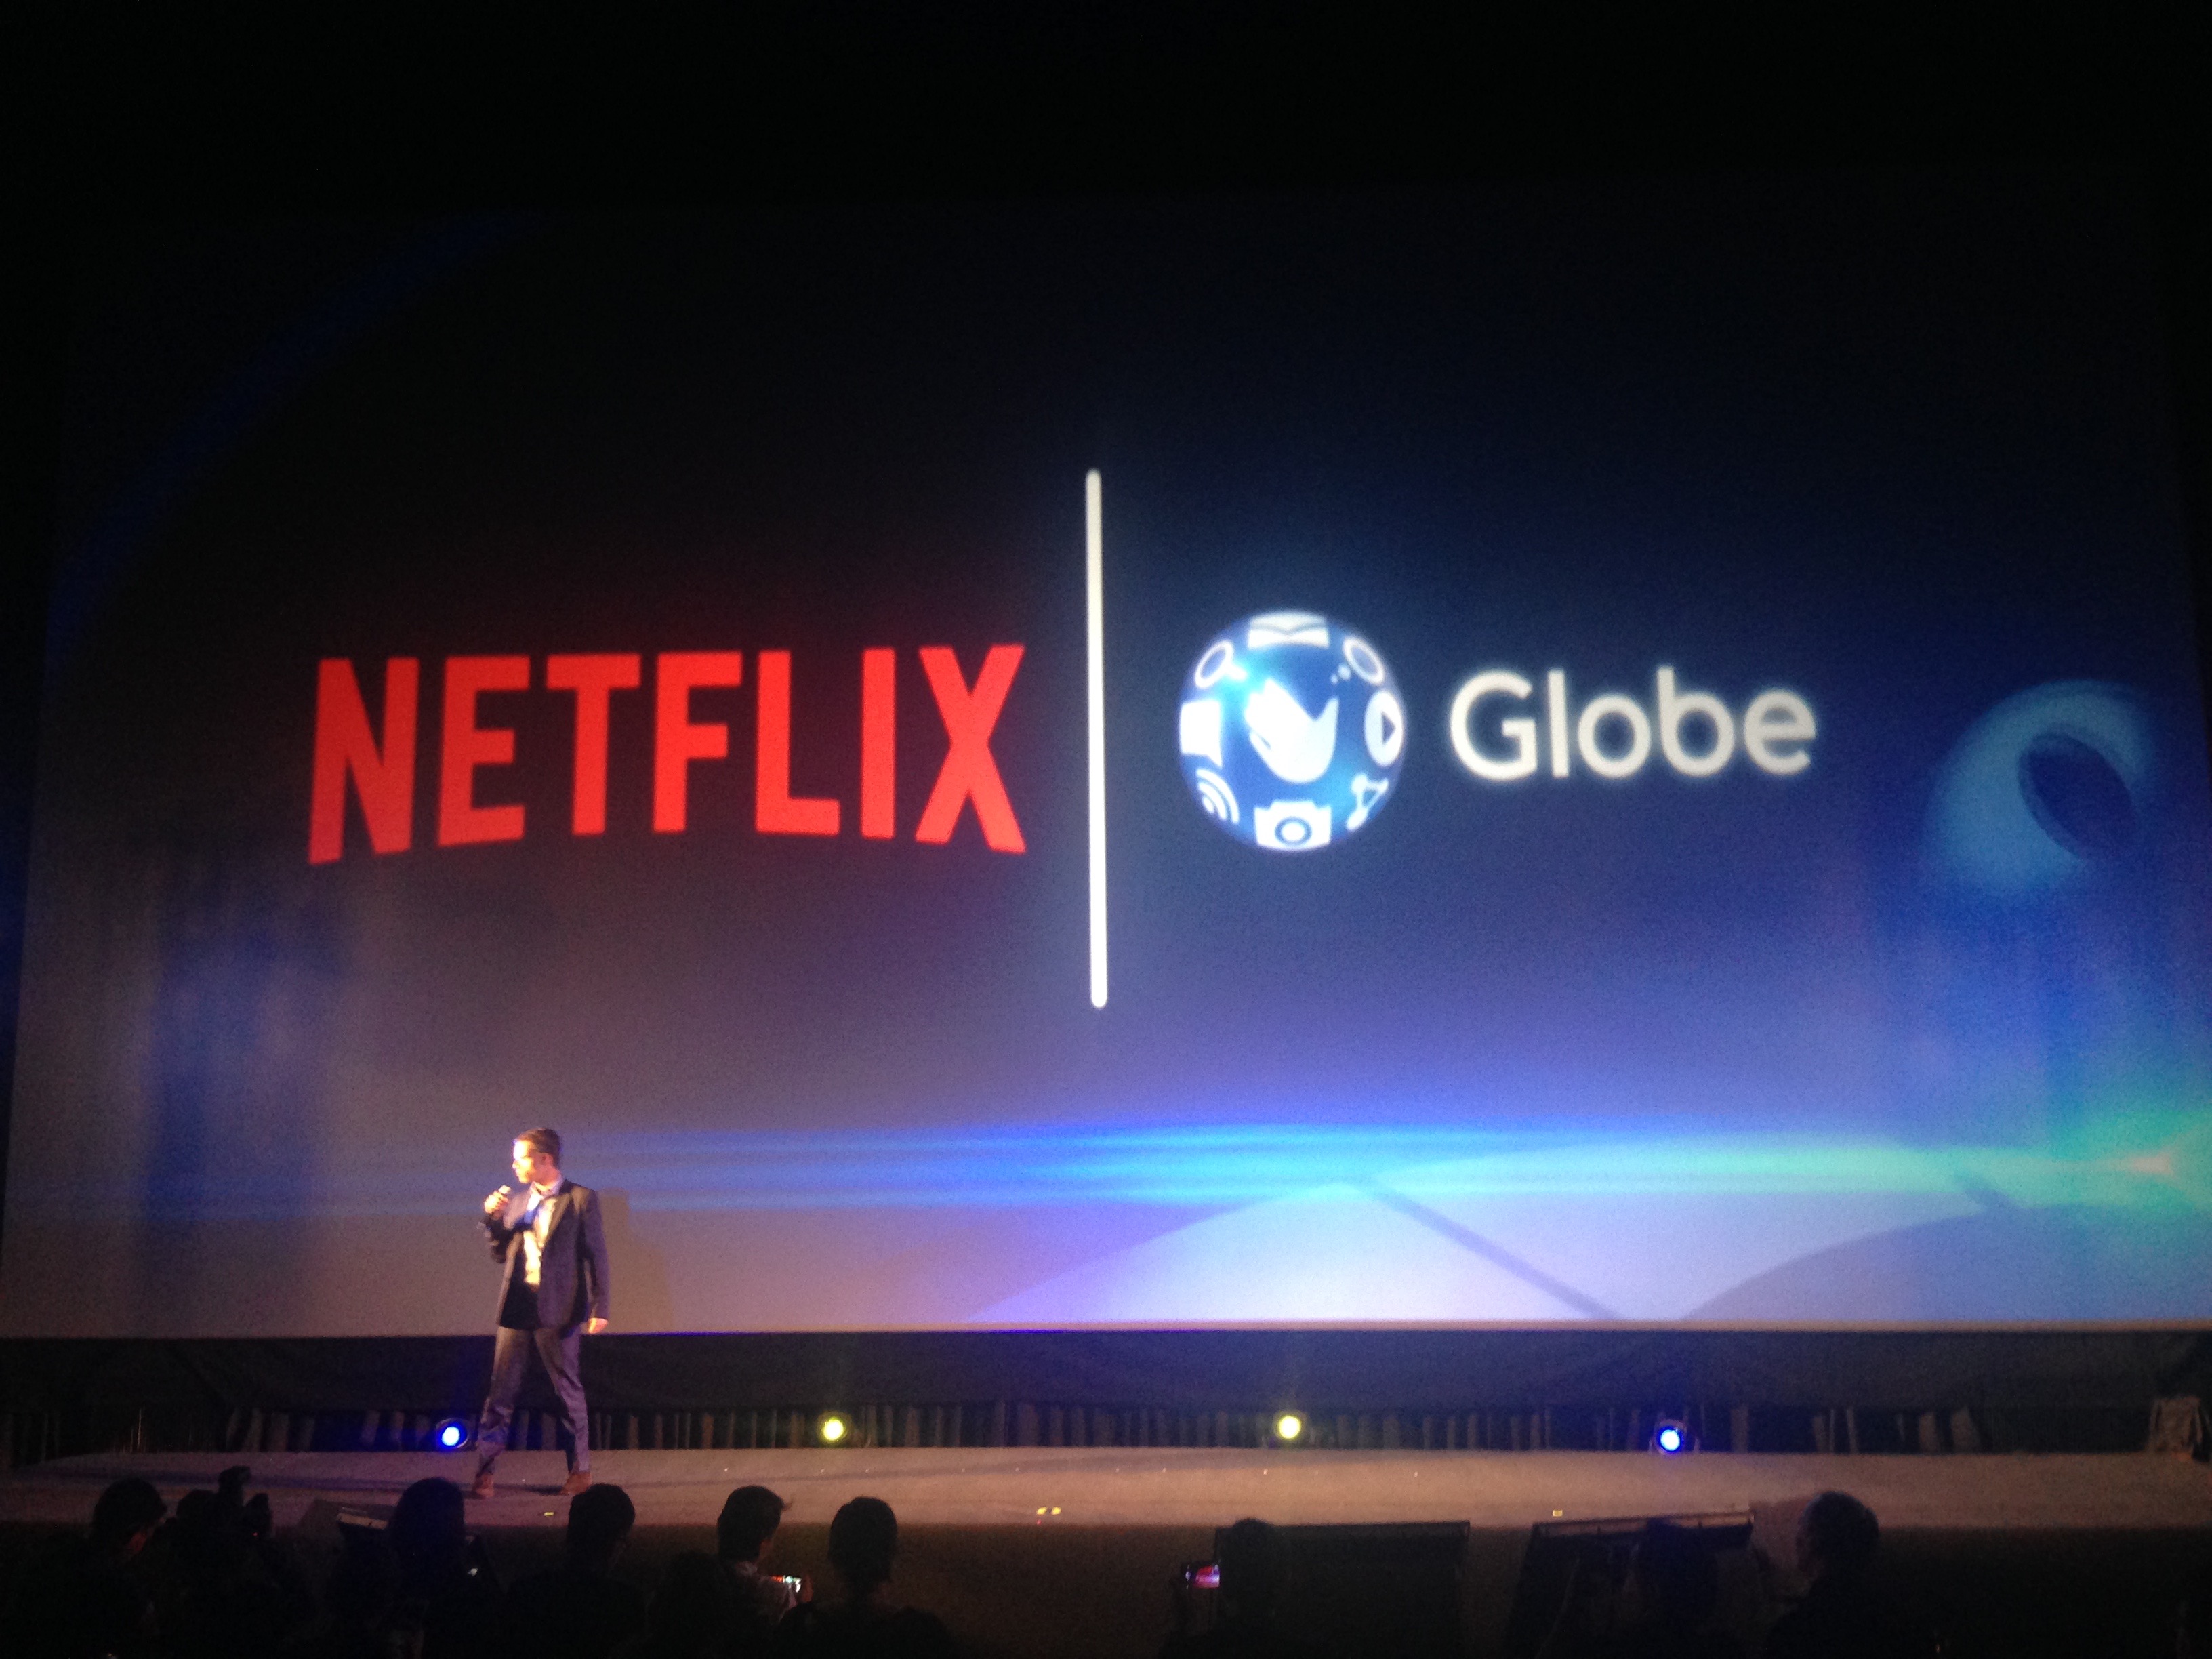 DUPLICITY WITH HOOQ? Soon, Netflix will be available to Globe customers via their mobile or broadband service. 